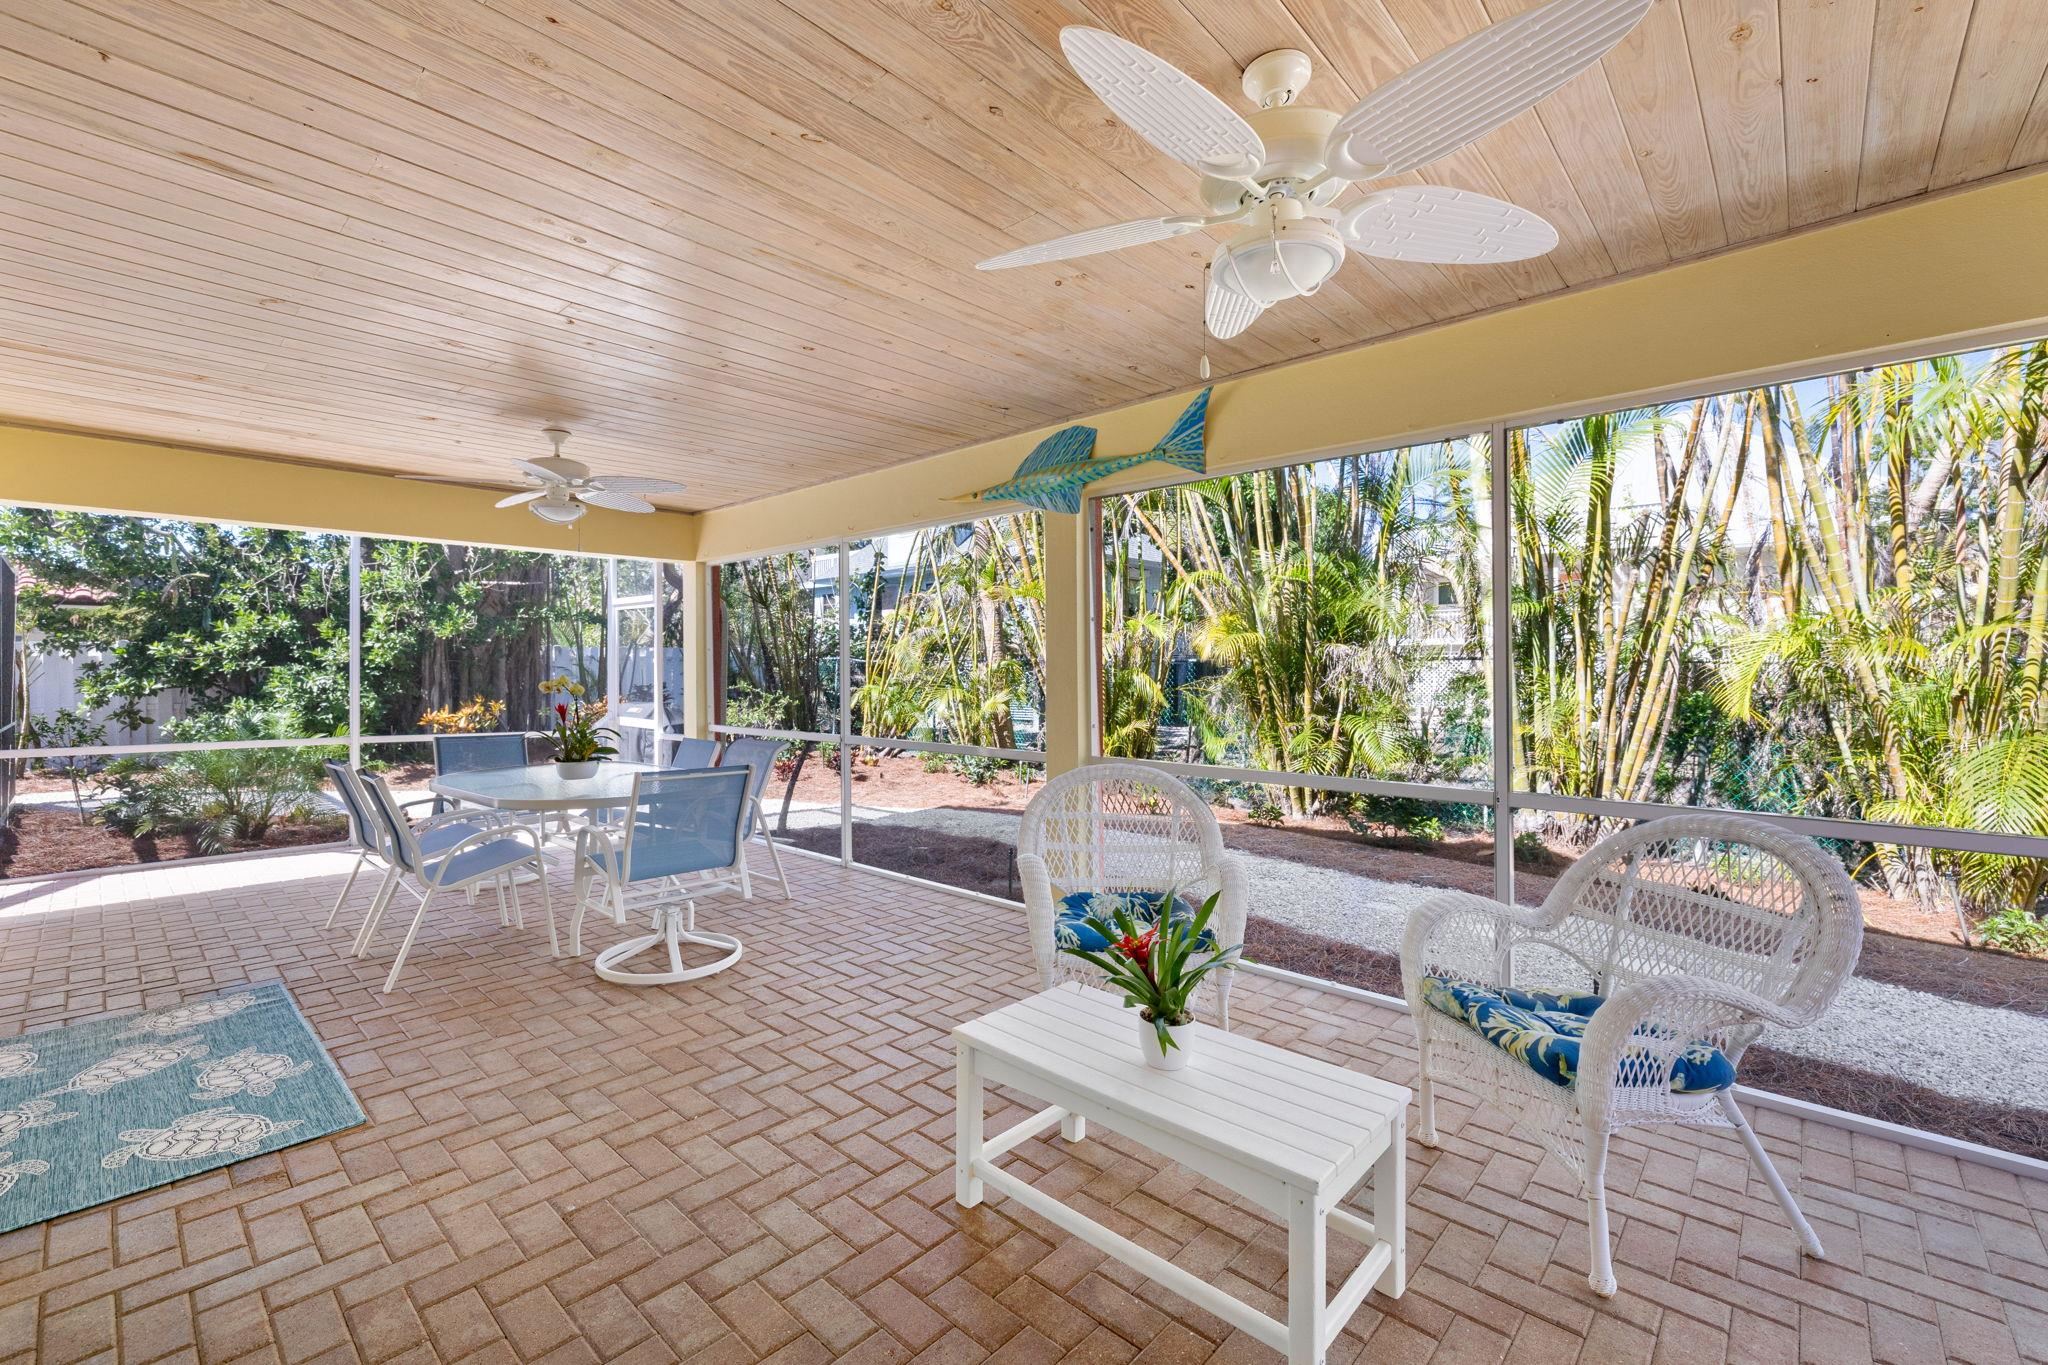 11530 Chapin Ln, Captiva, Florida 33924, 3 Bedrooms Bedrooms, ,2 BathroomsBathrooms,Residential,For Sale,Chapin Ln,2230388